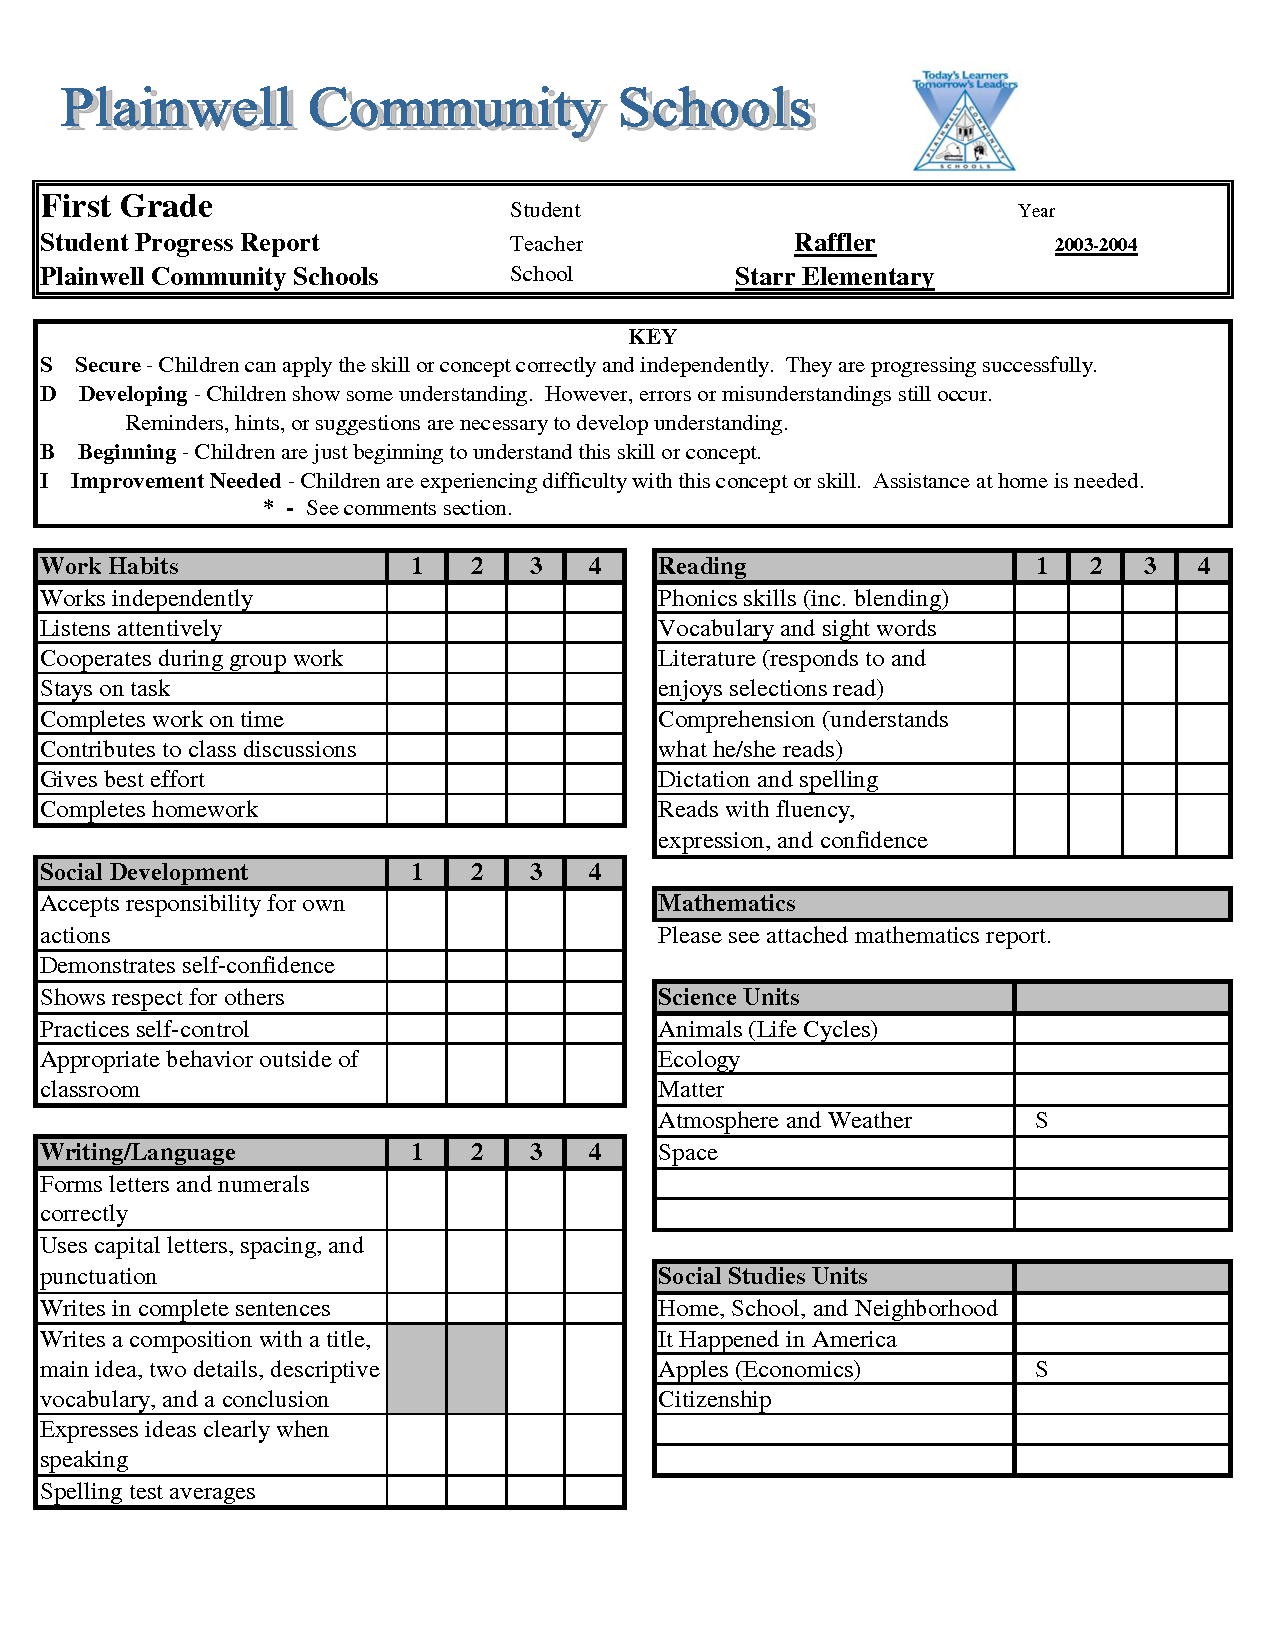 Report Card Template - Excel.xls Download Legal Documents In High School Student Report Card Template